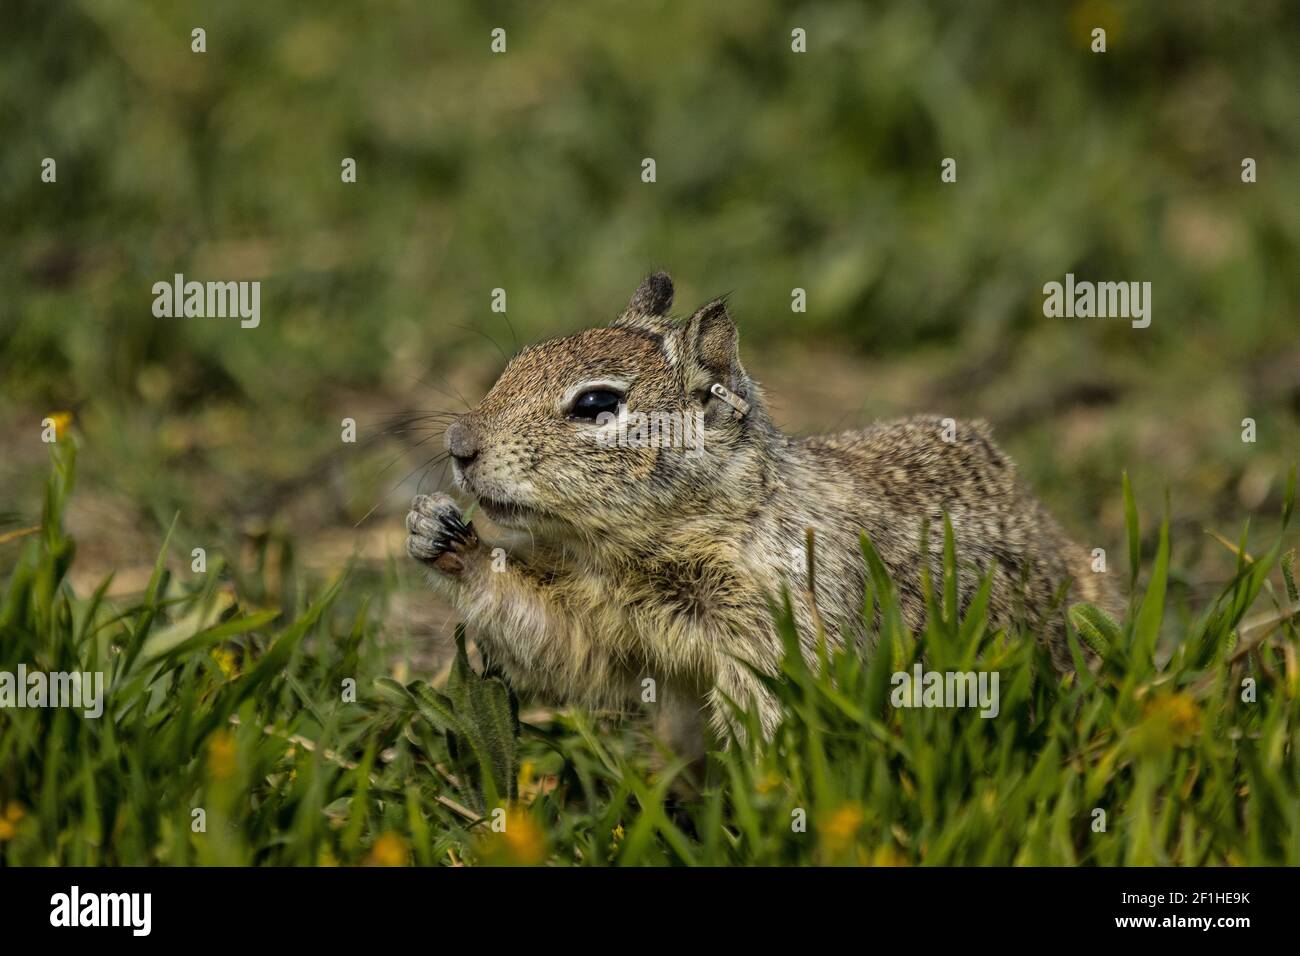 A California Ground Squirrel With an ear tag on a spring like day in March at the Merced National wildlife refuge Stock Photo